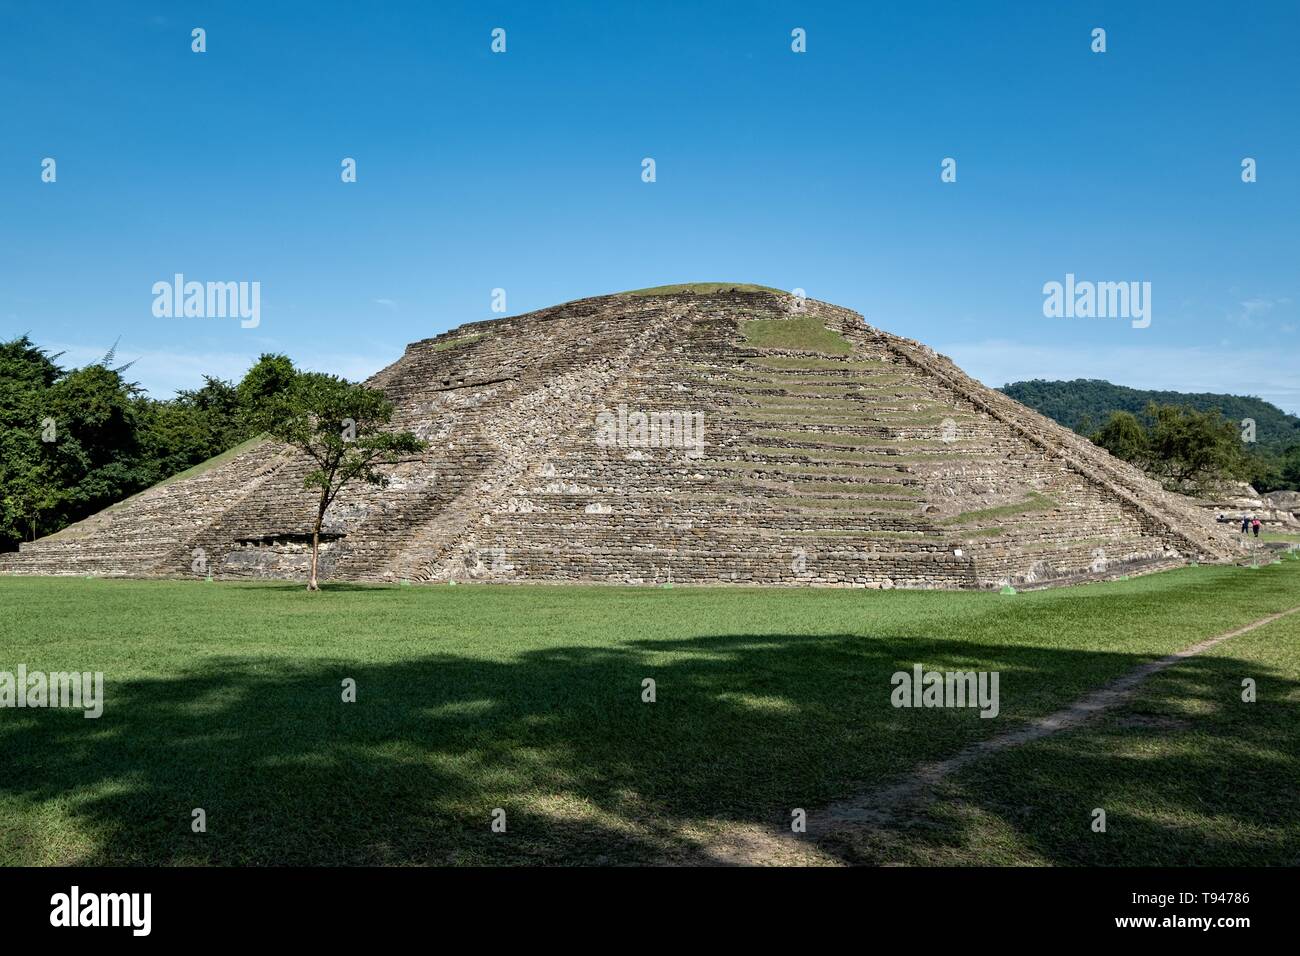 mesoamerica-pyramid-called-building-19-in-the-arroyo-group-at-the-pre-columbian-archeological